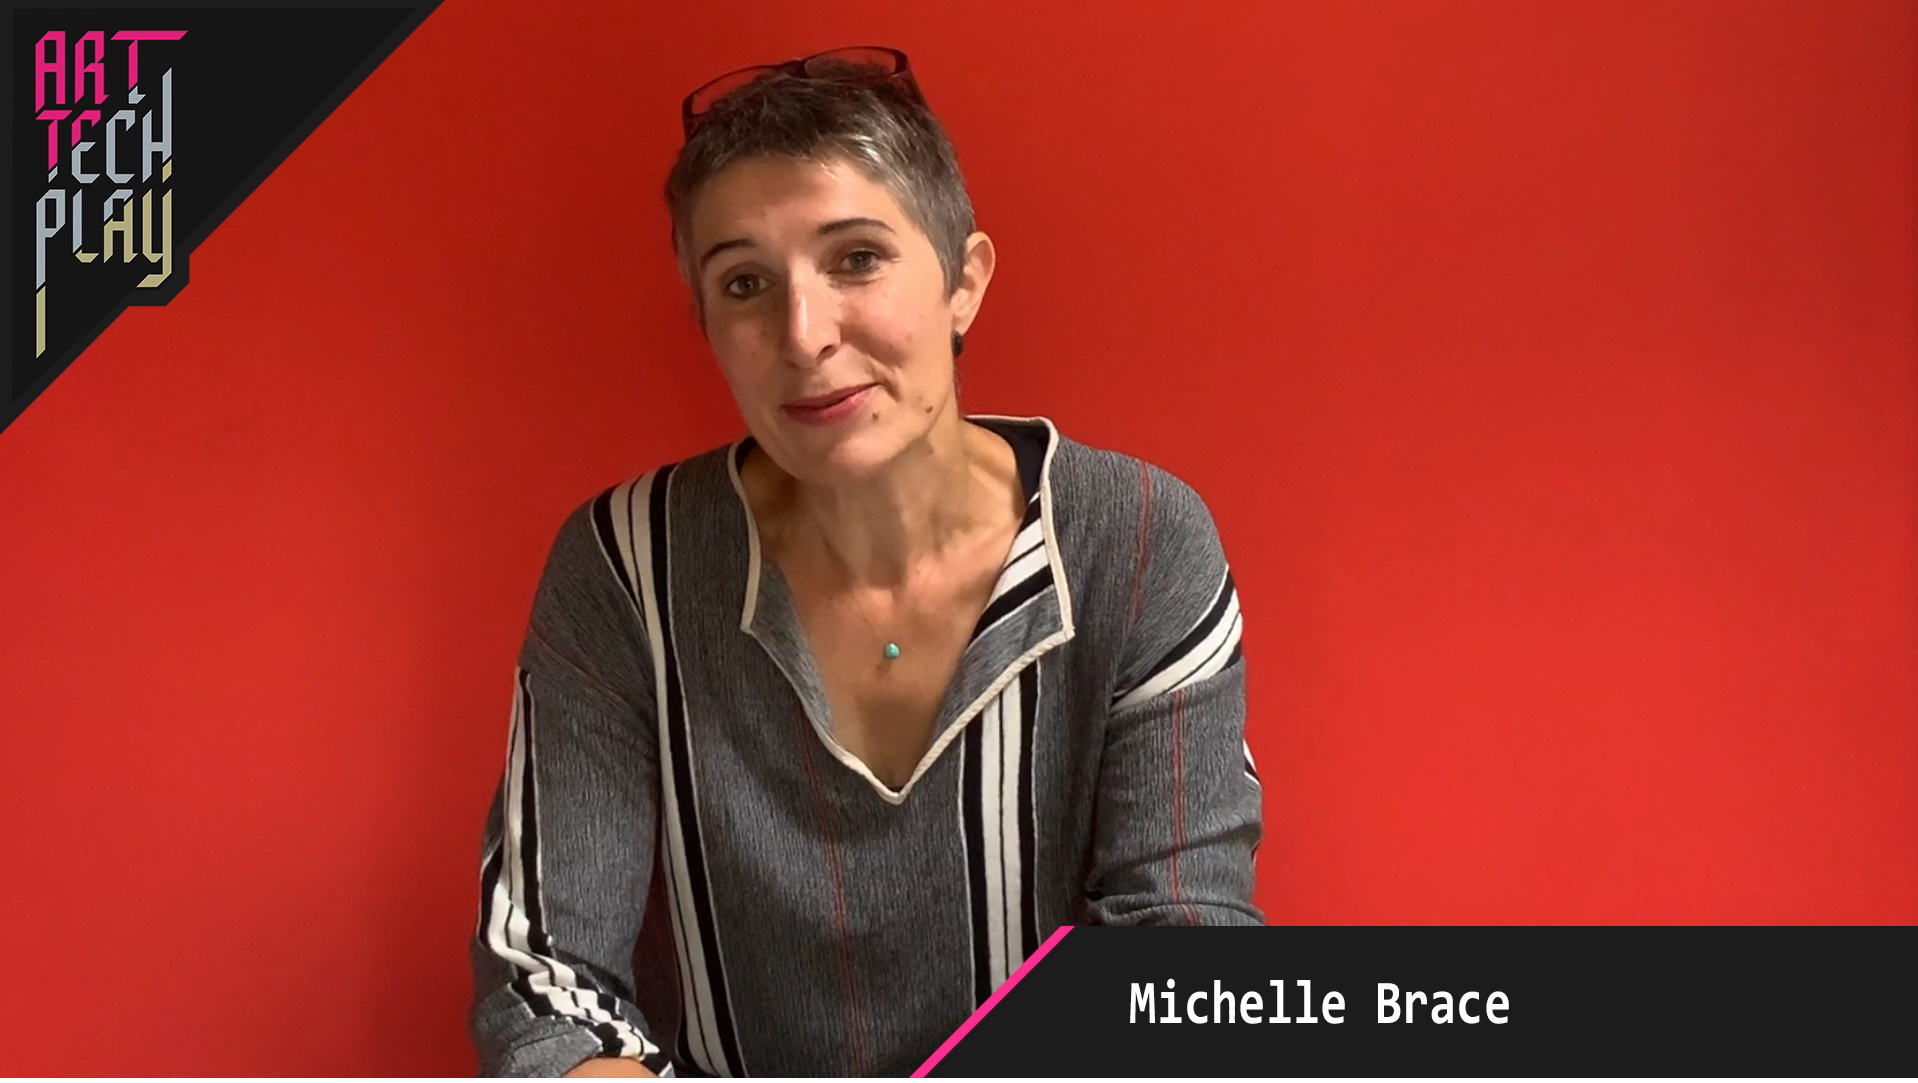 Michelle Brace on visual mixing with Resolume